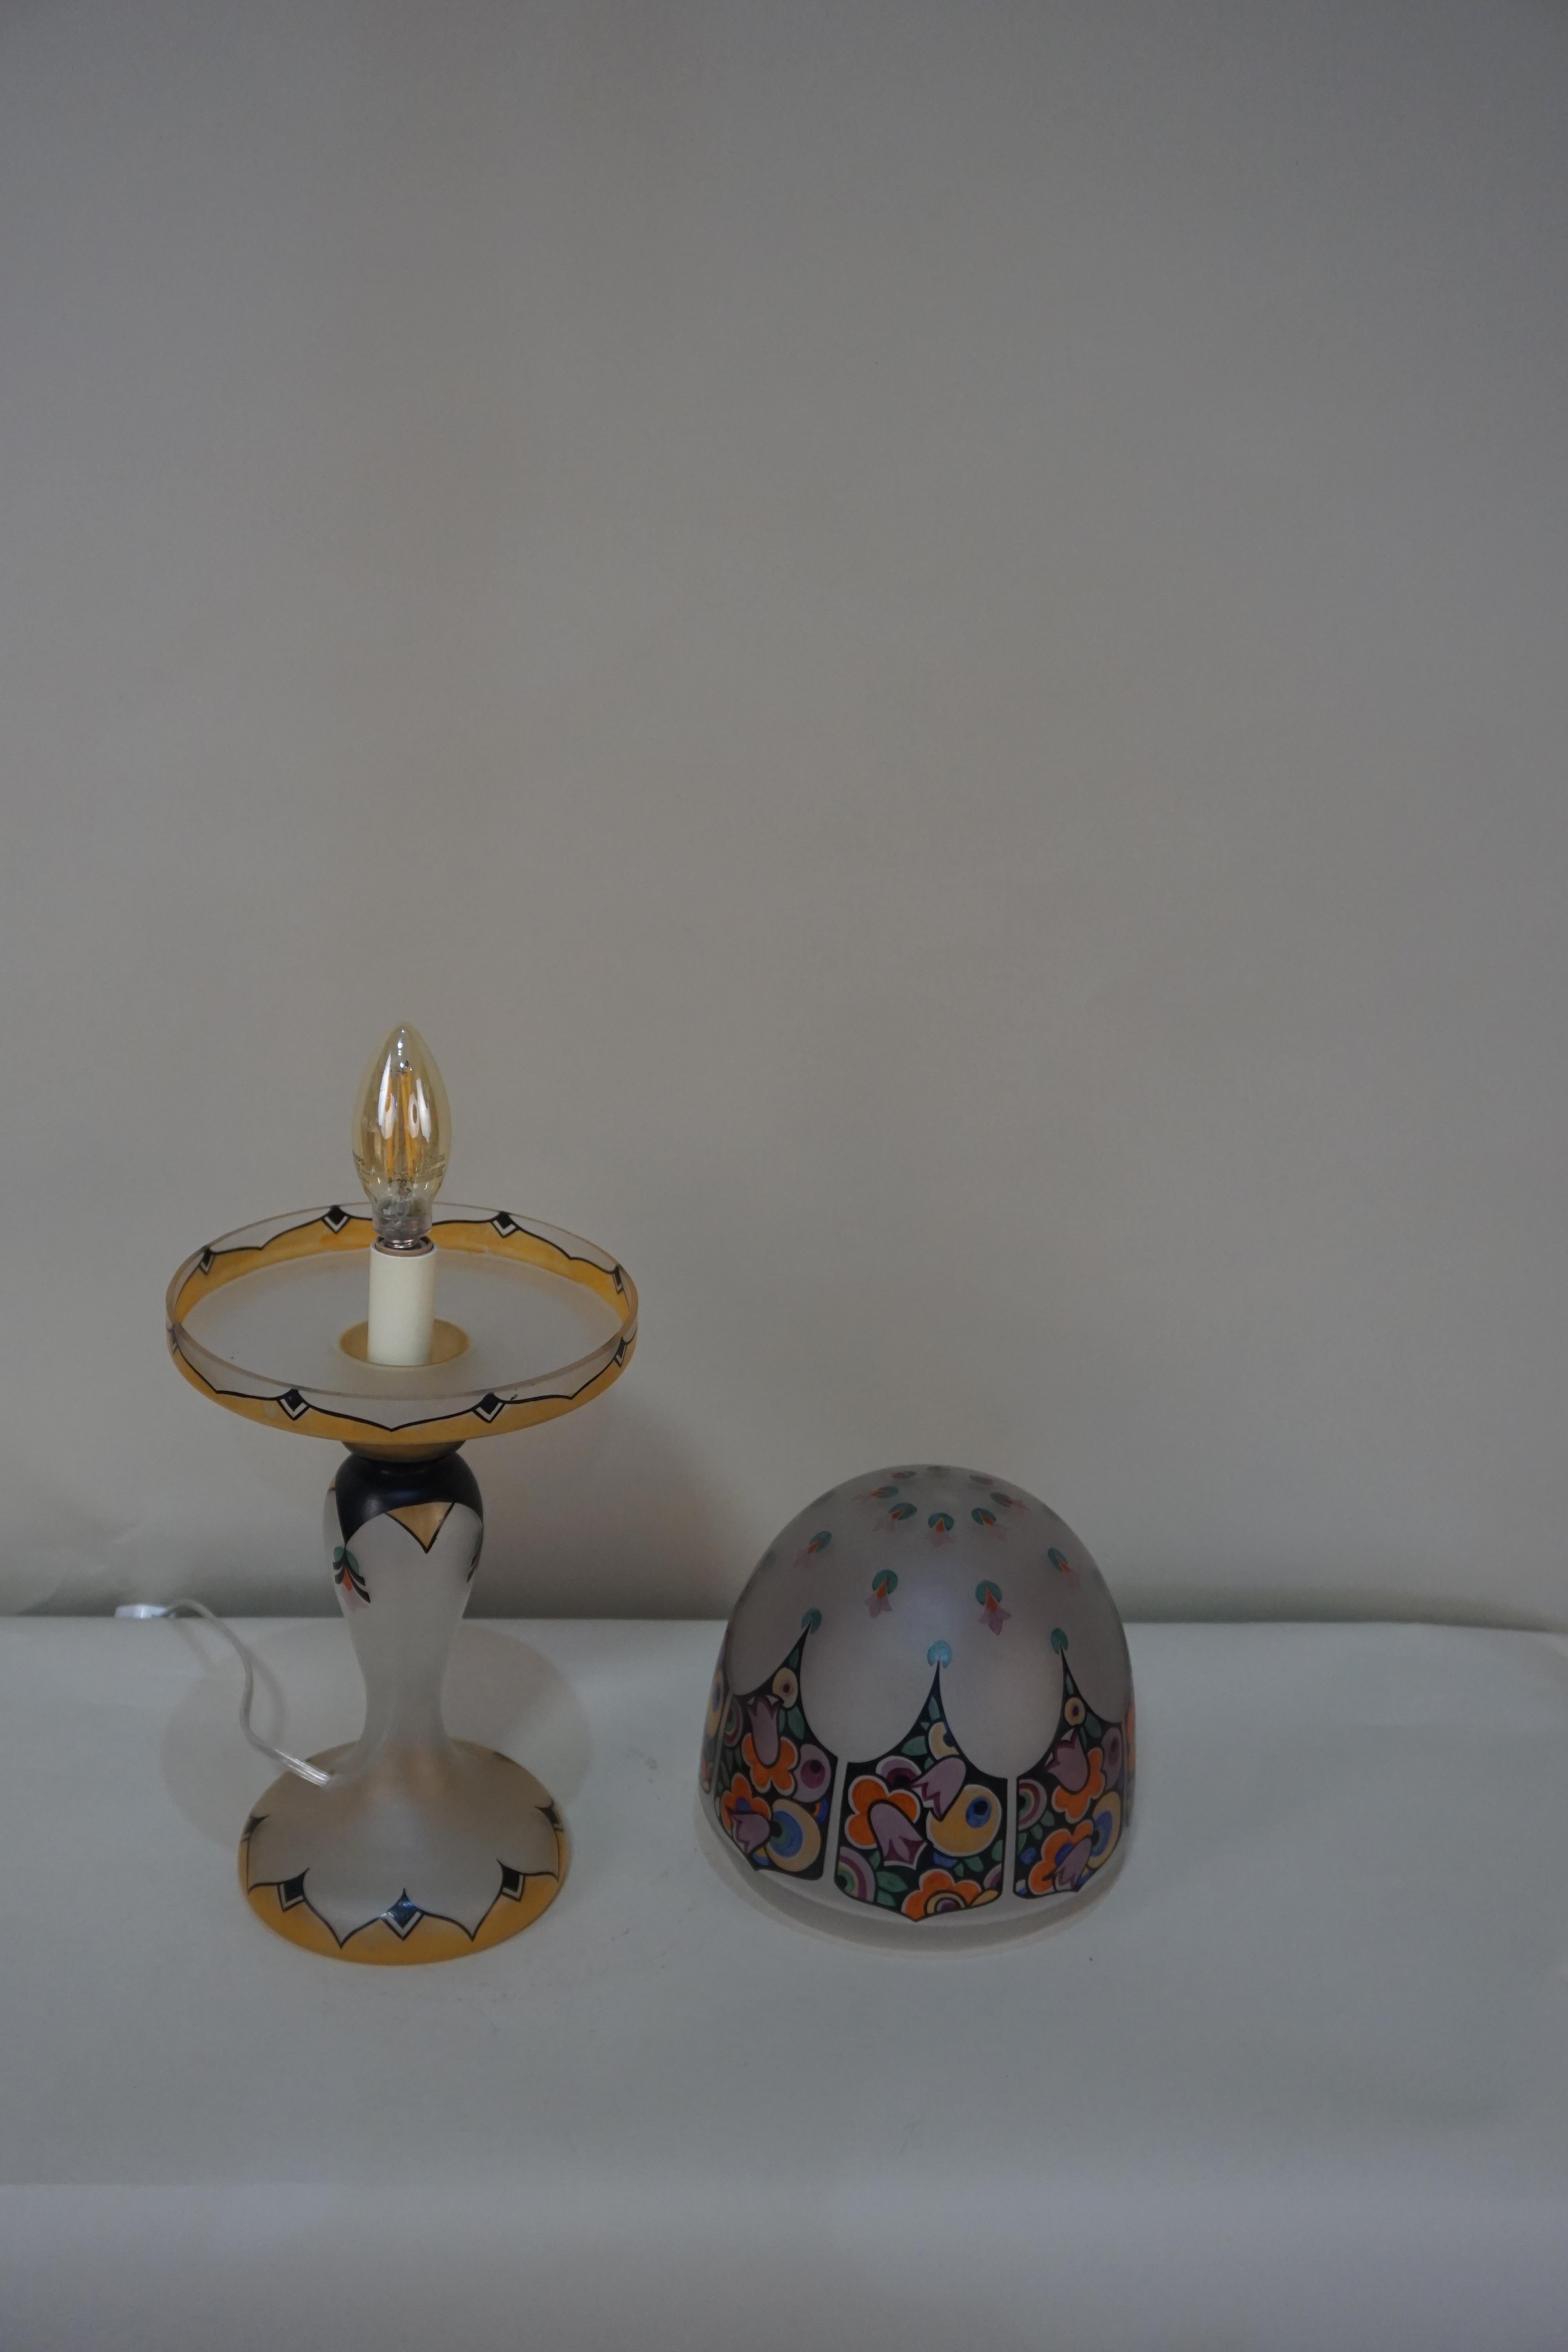 English Hand-Painted Glass Art Deco Table Lamp 1